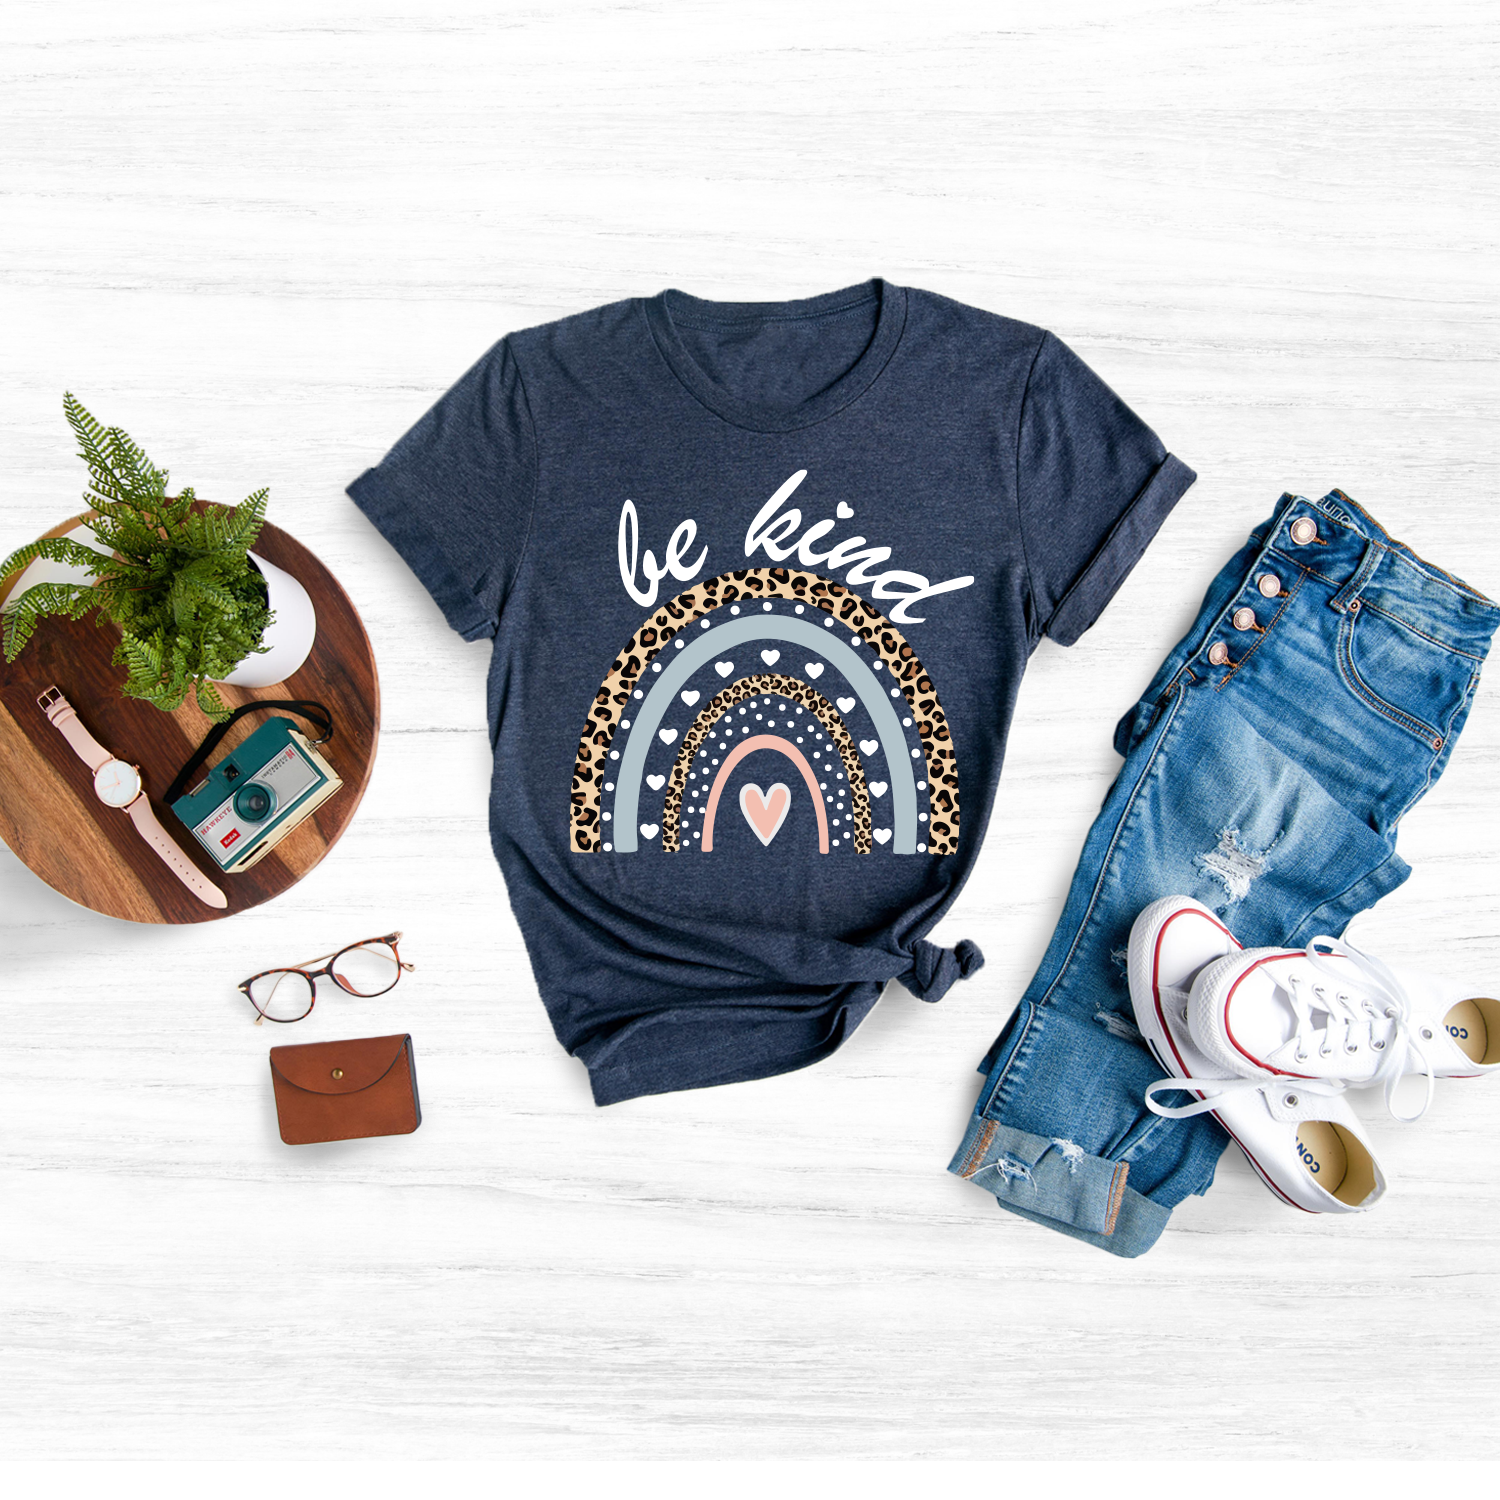 Spread kindness and inspiration with our "Be Kind" Graphic T-Shirt, the perfect gift for teachers, students, or anyone who wants to make a positive impact on the world.